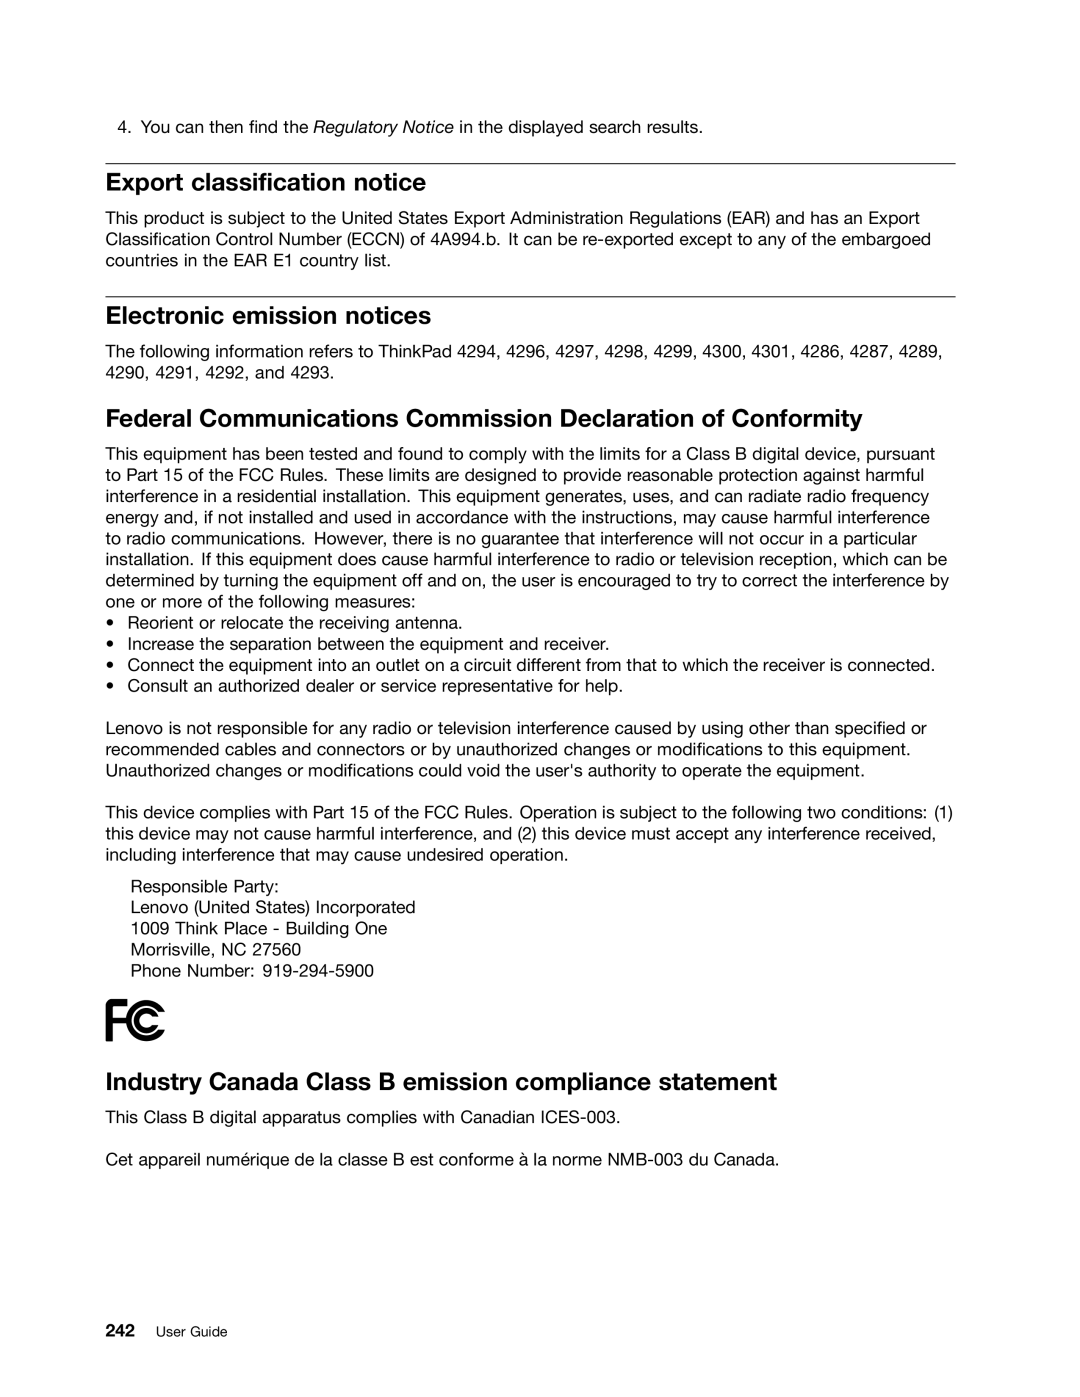 Lenovo 429040 manual Export classification notice, Electronic emission notices 